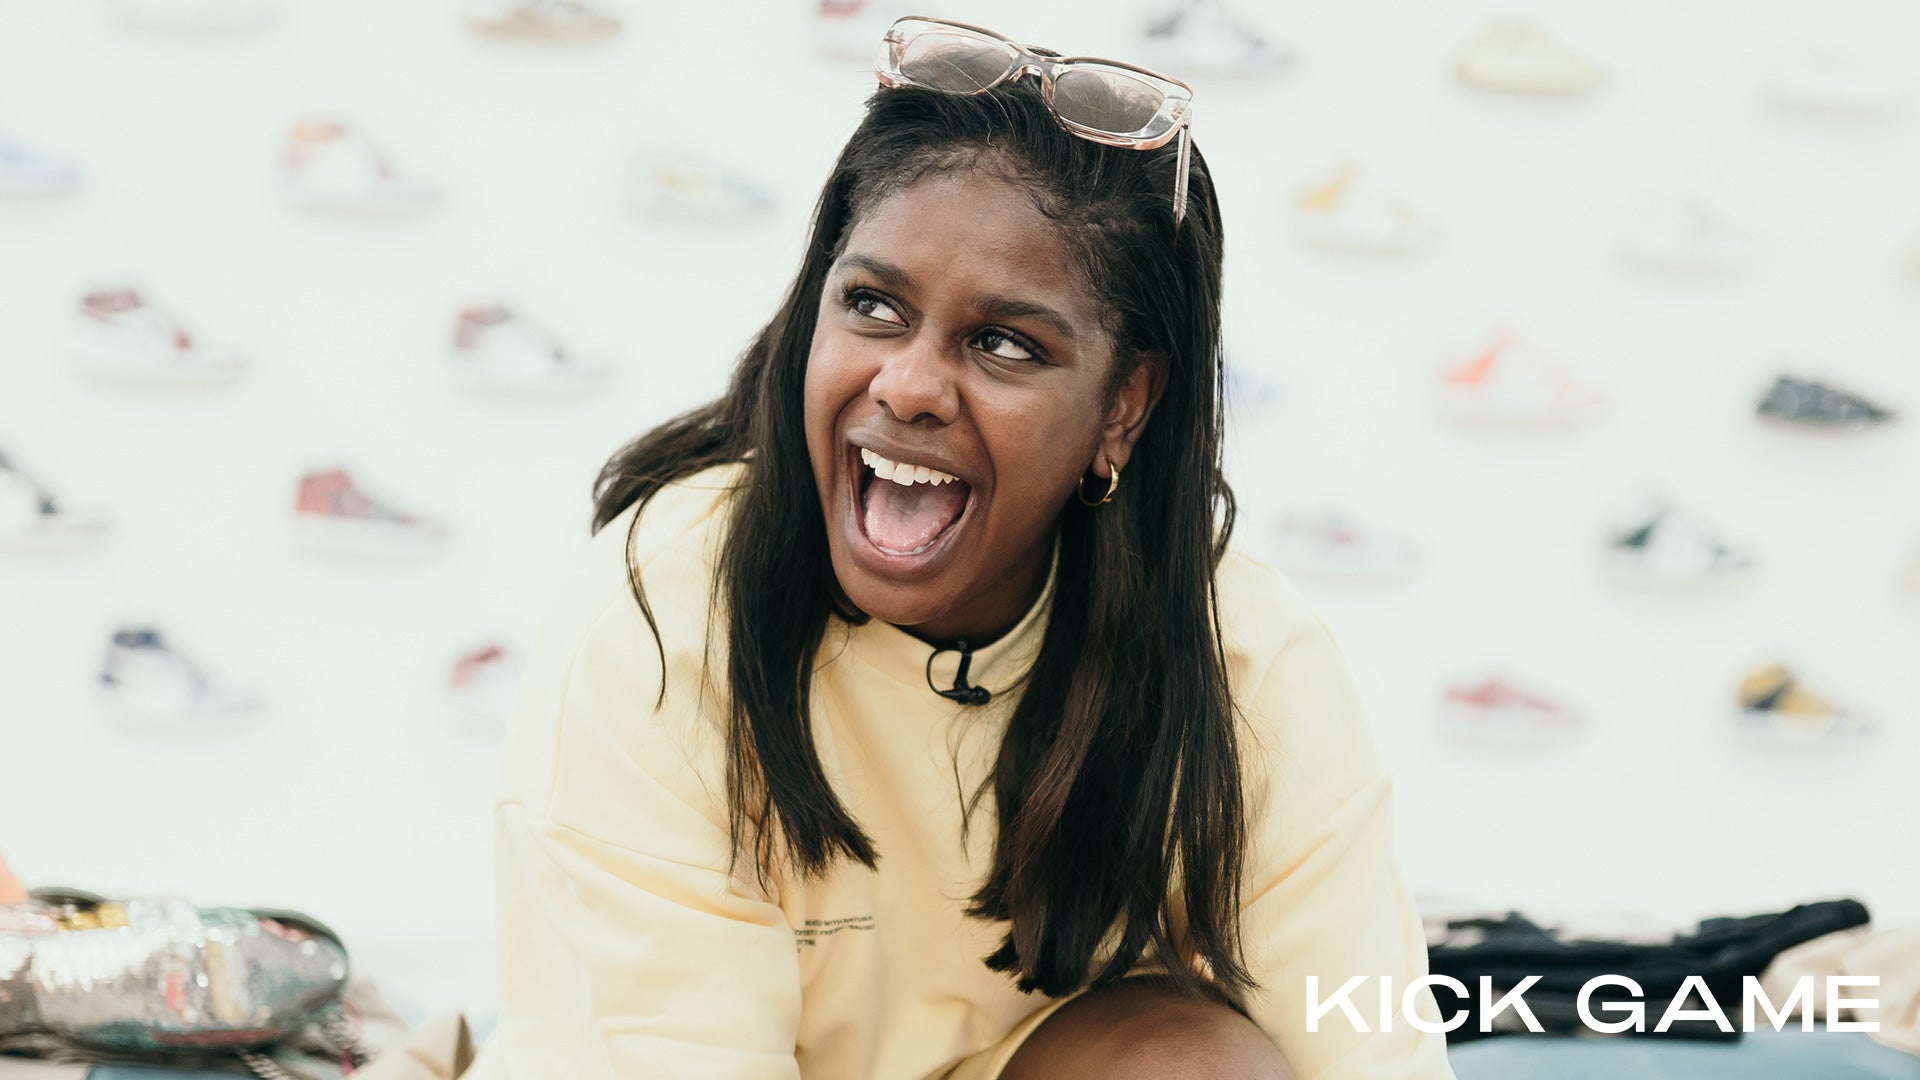 Zeze Millz Goes Shopping for Sneakers at Kick Game